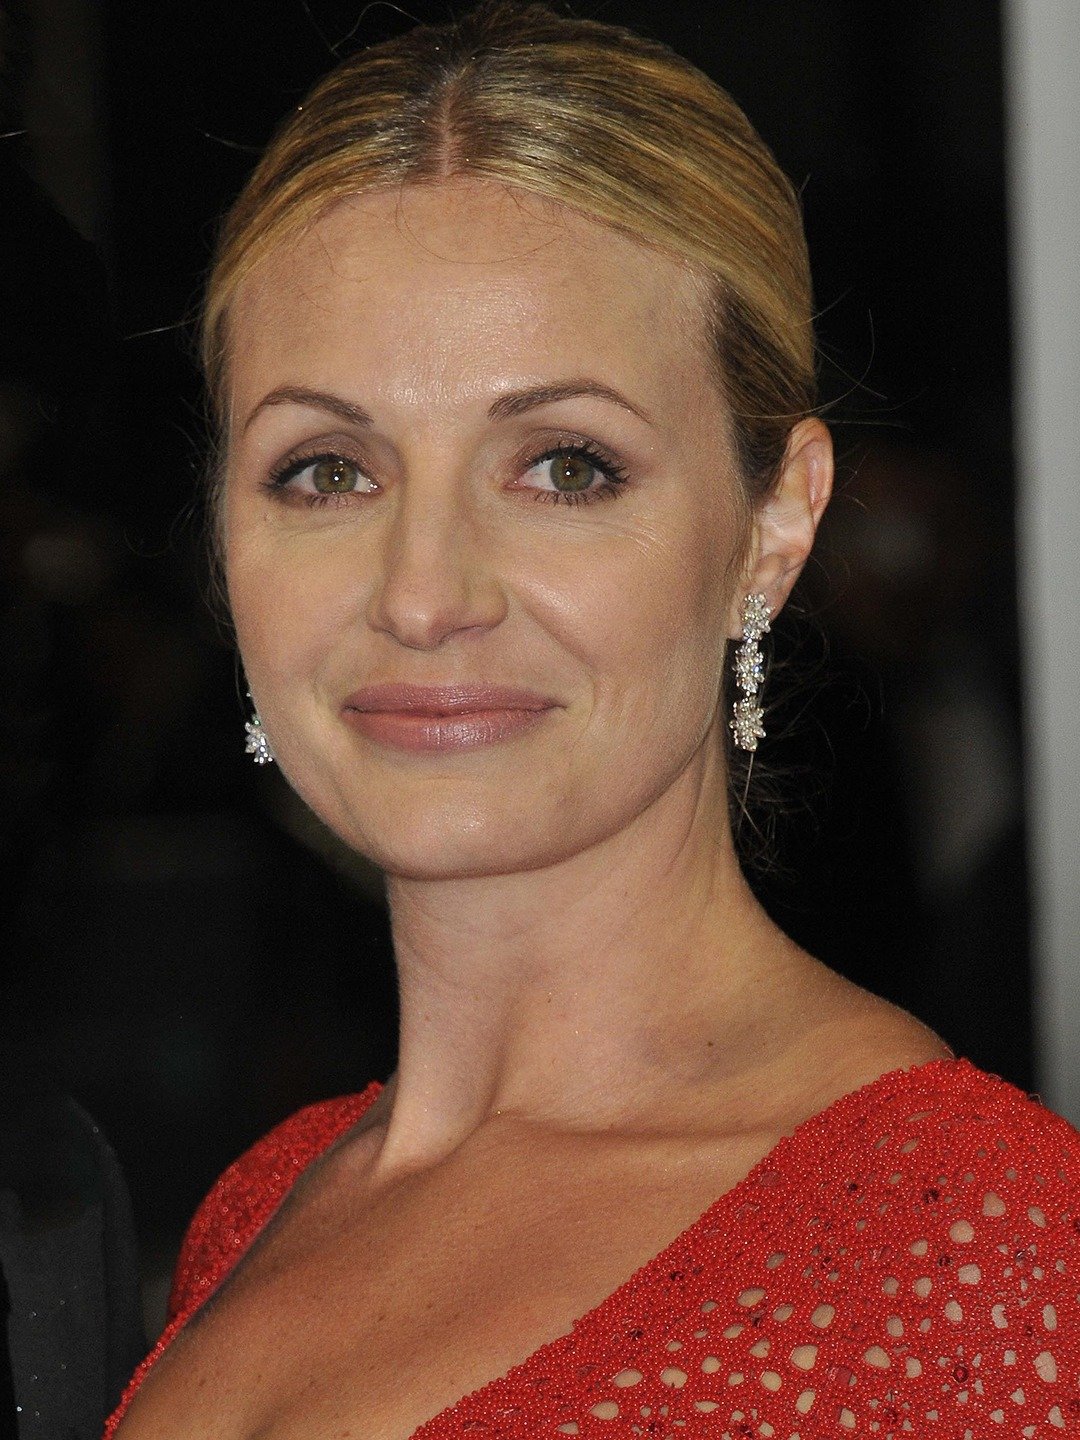 Elize du Toit South African Actress, Director, Writer